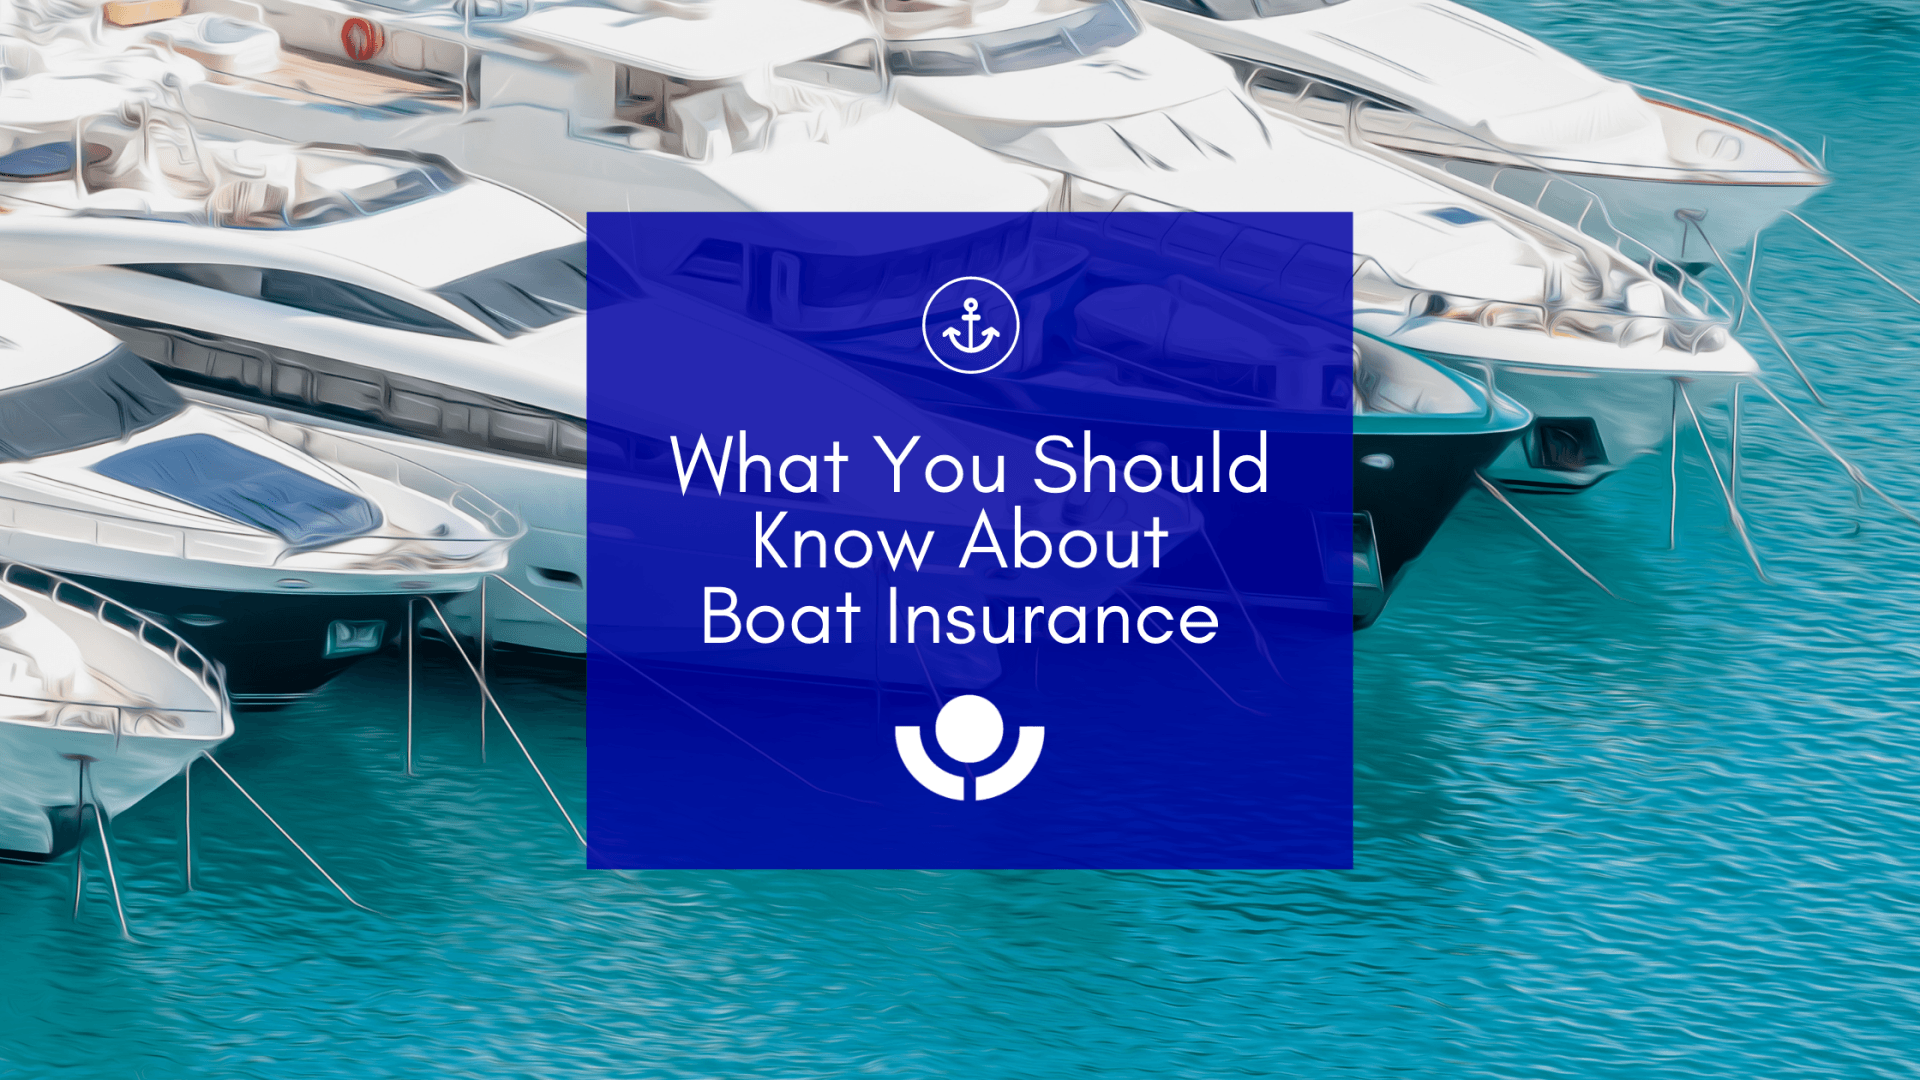 What You Should Know About Boat Insurance